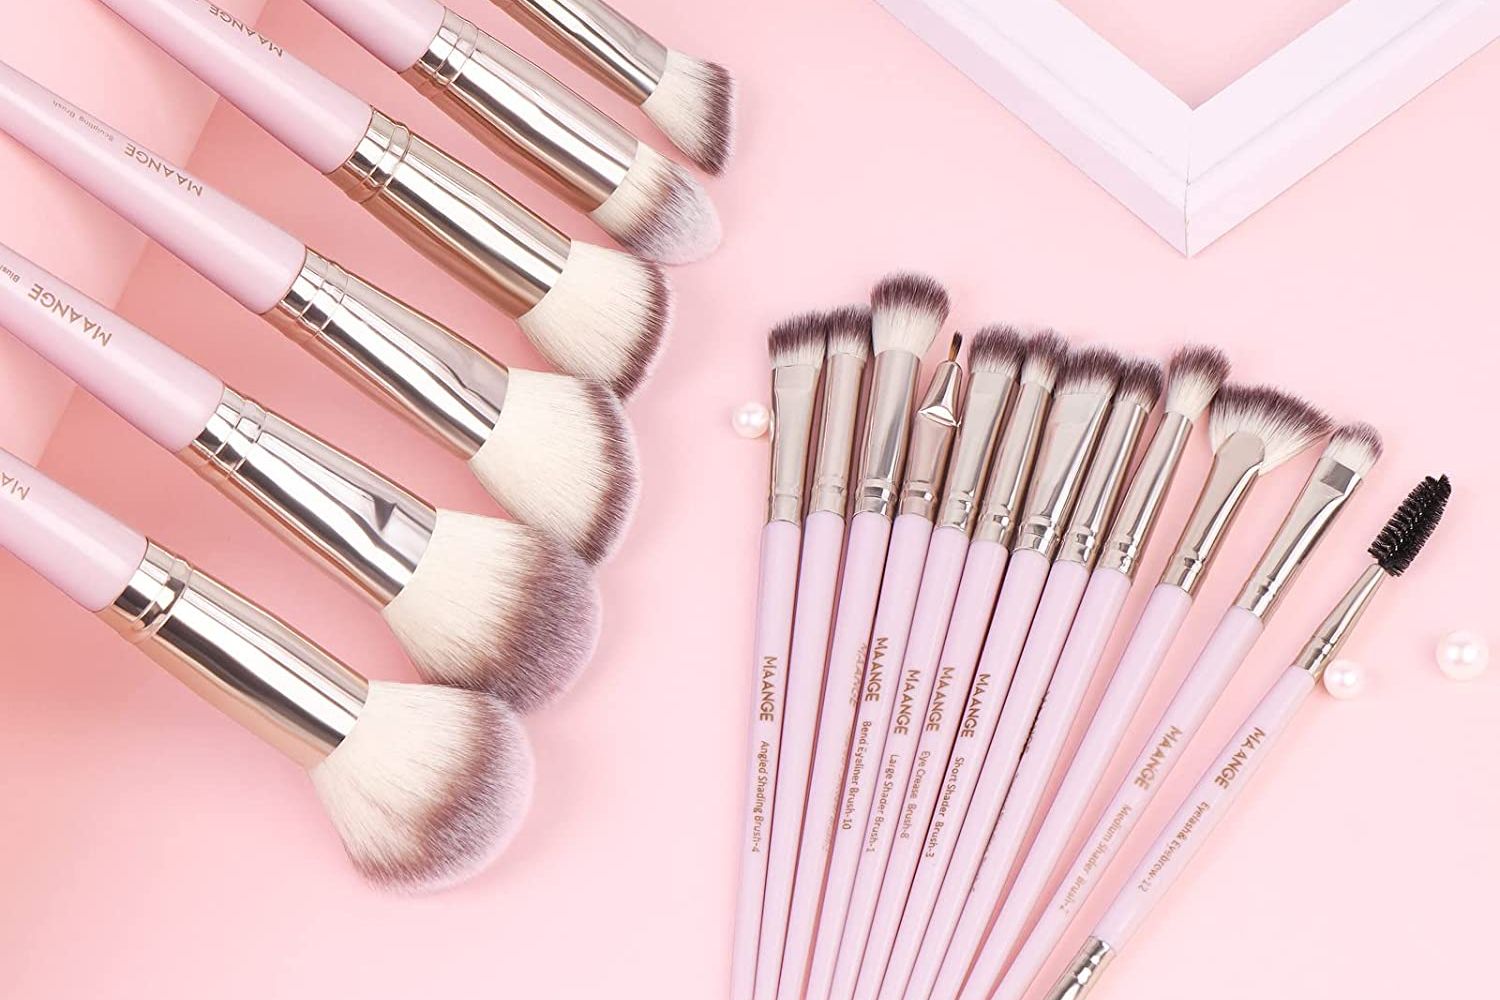 Makeup brushes, early amazon black friday 2022 deals